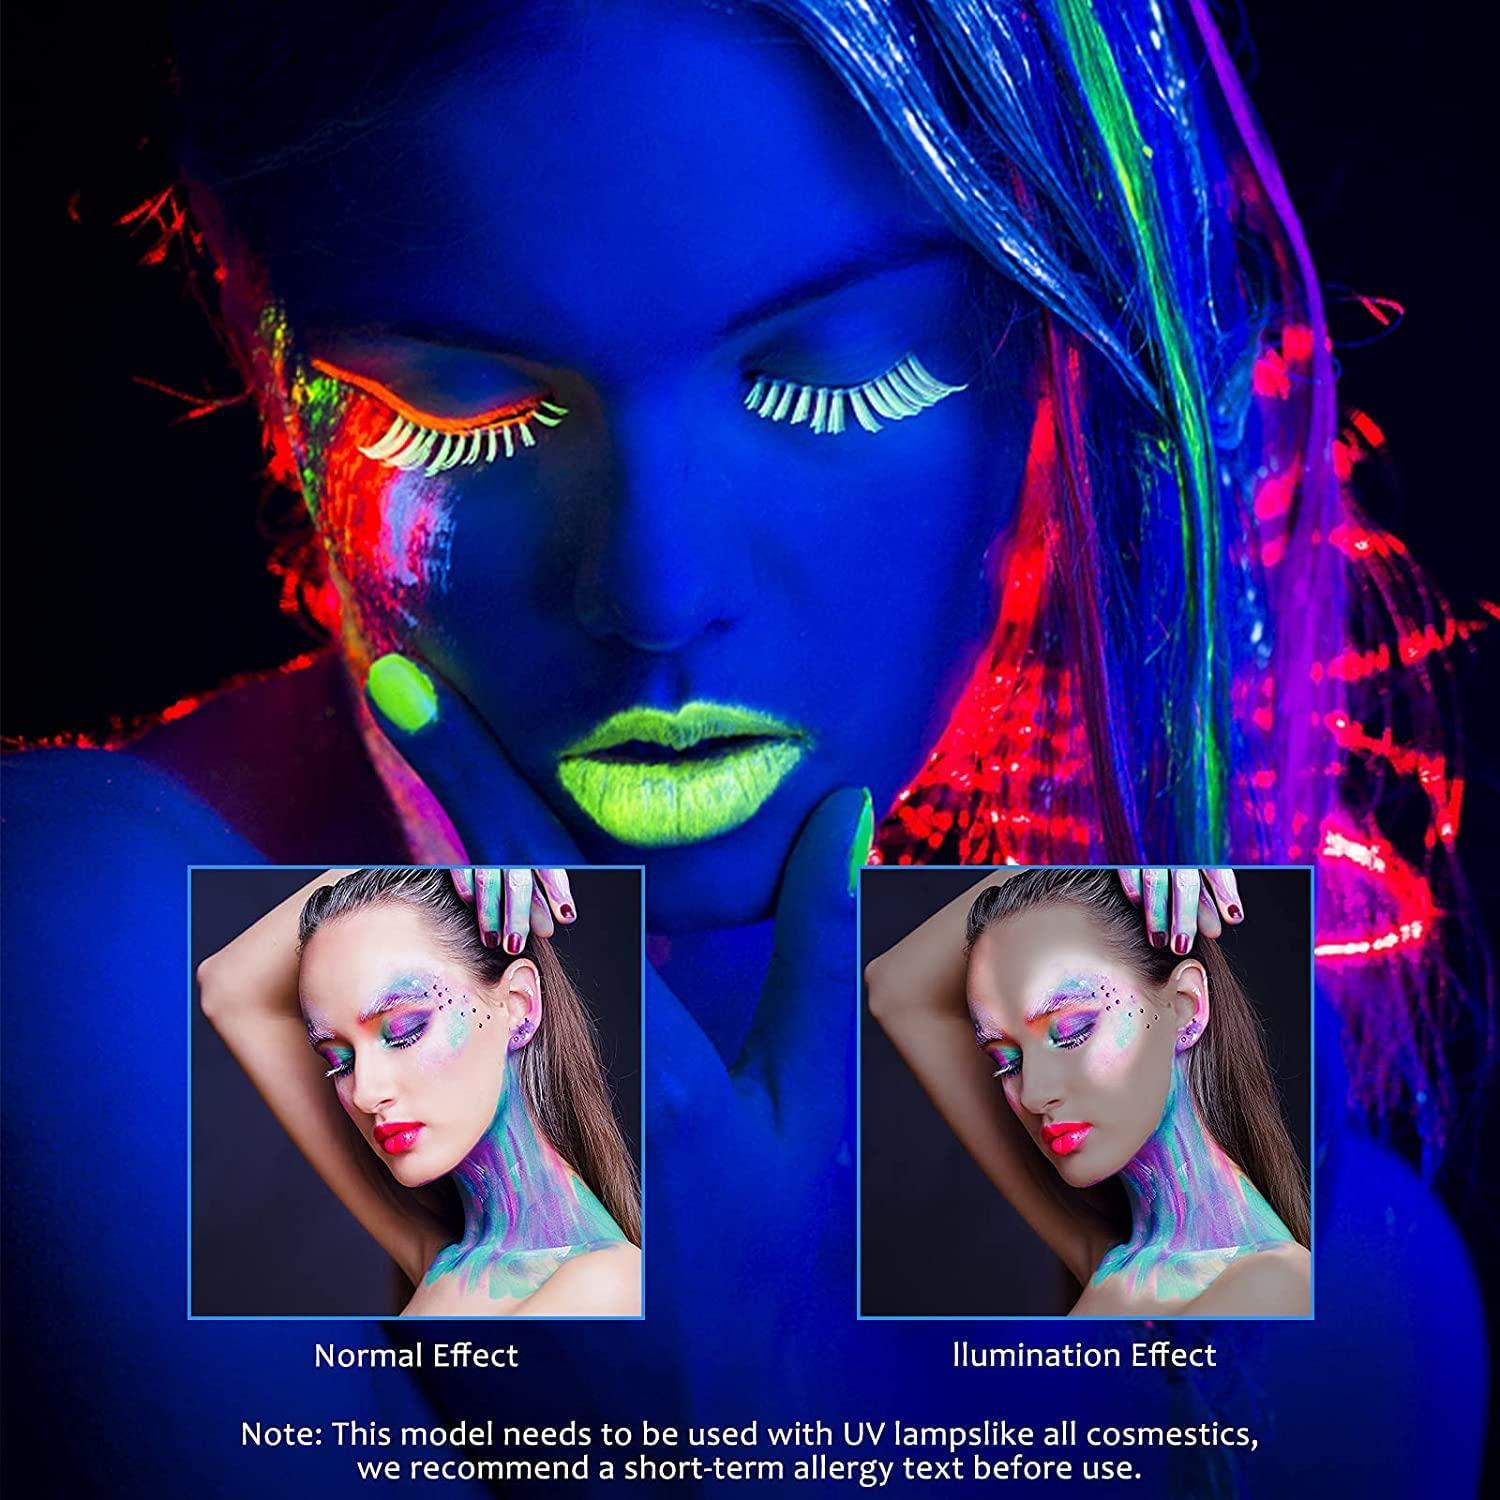 Black Light Party Outfit Ideas  Blacklight party, Black light makeup, Party  outfit